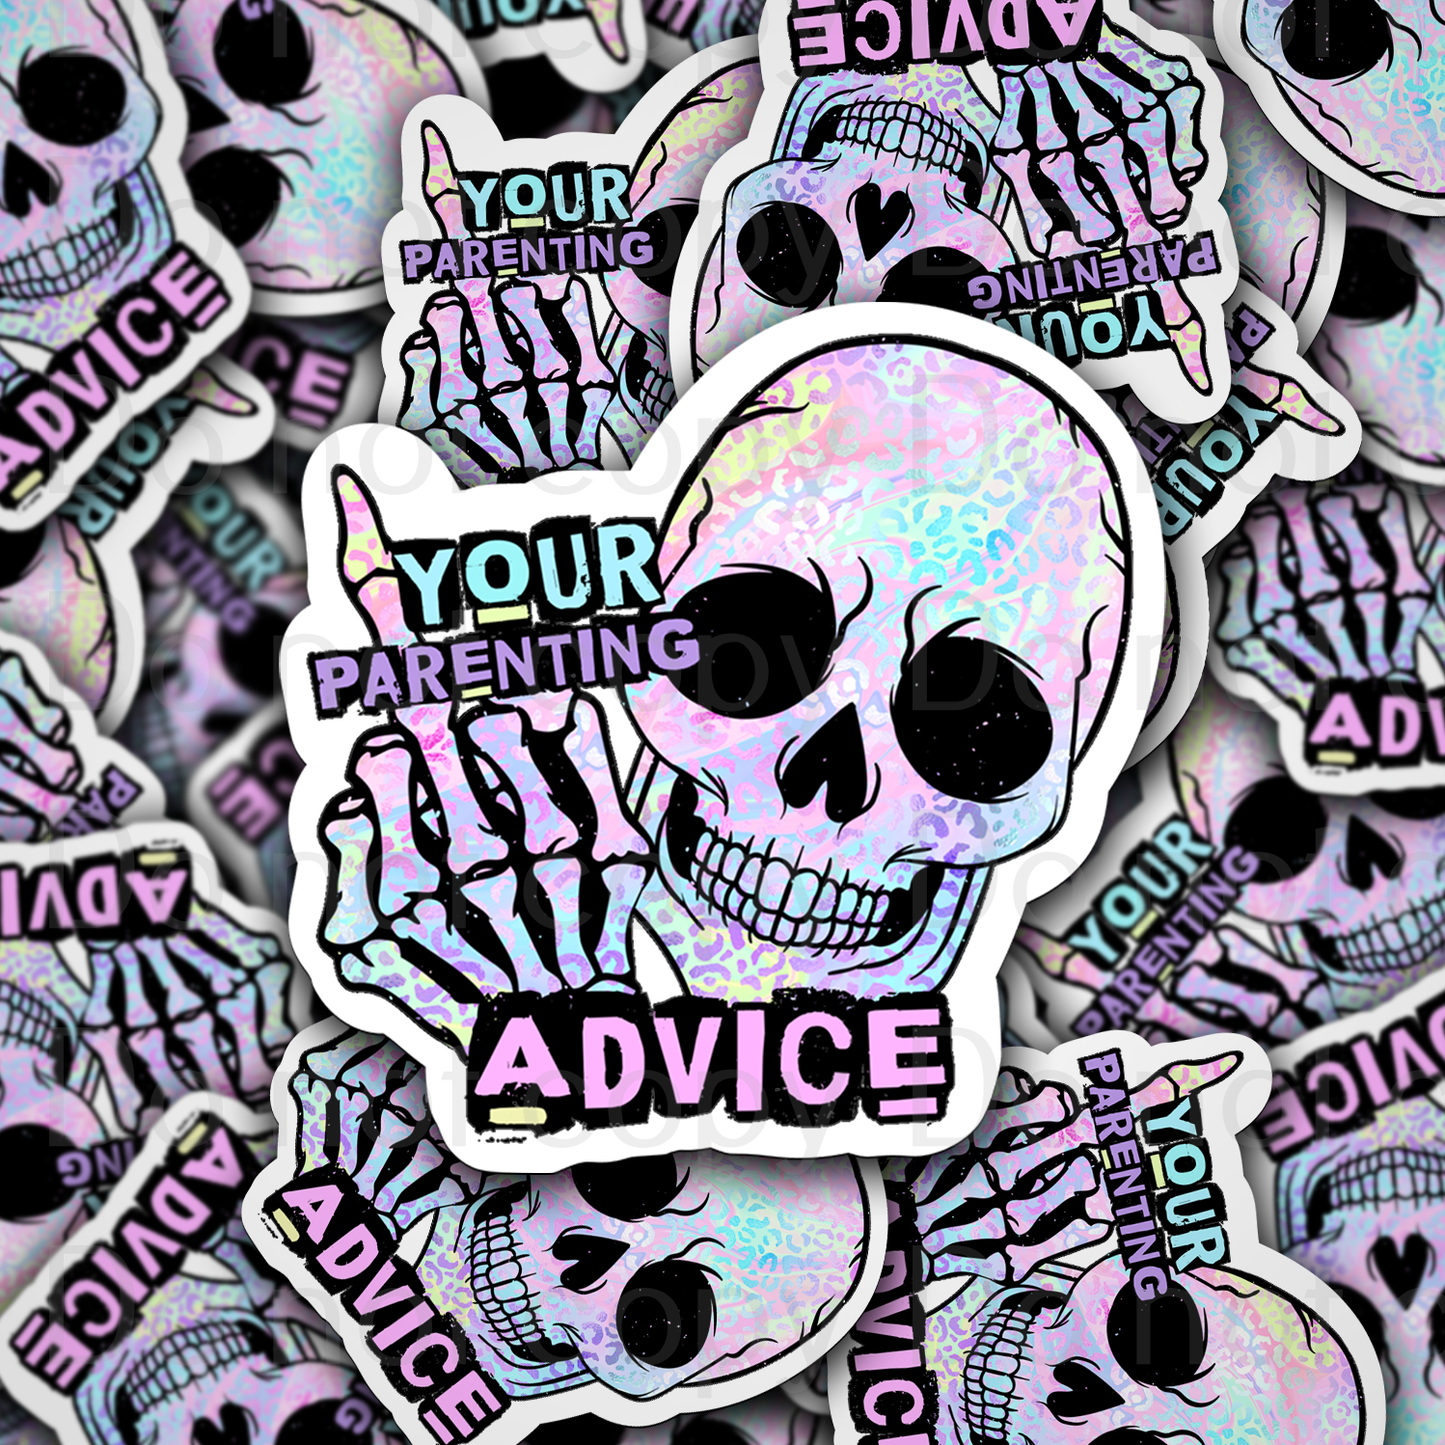 Your parenting advice skeleton Die cut sticker 3-5 Business Day TAT